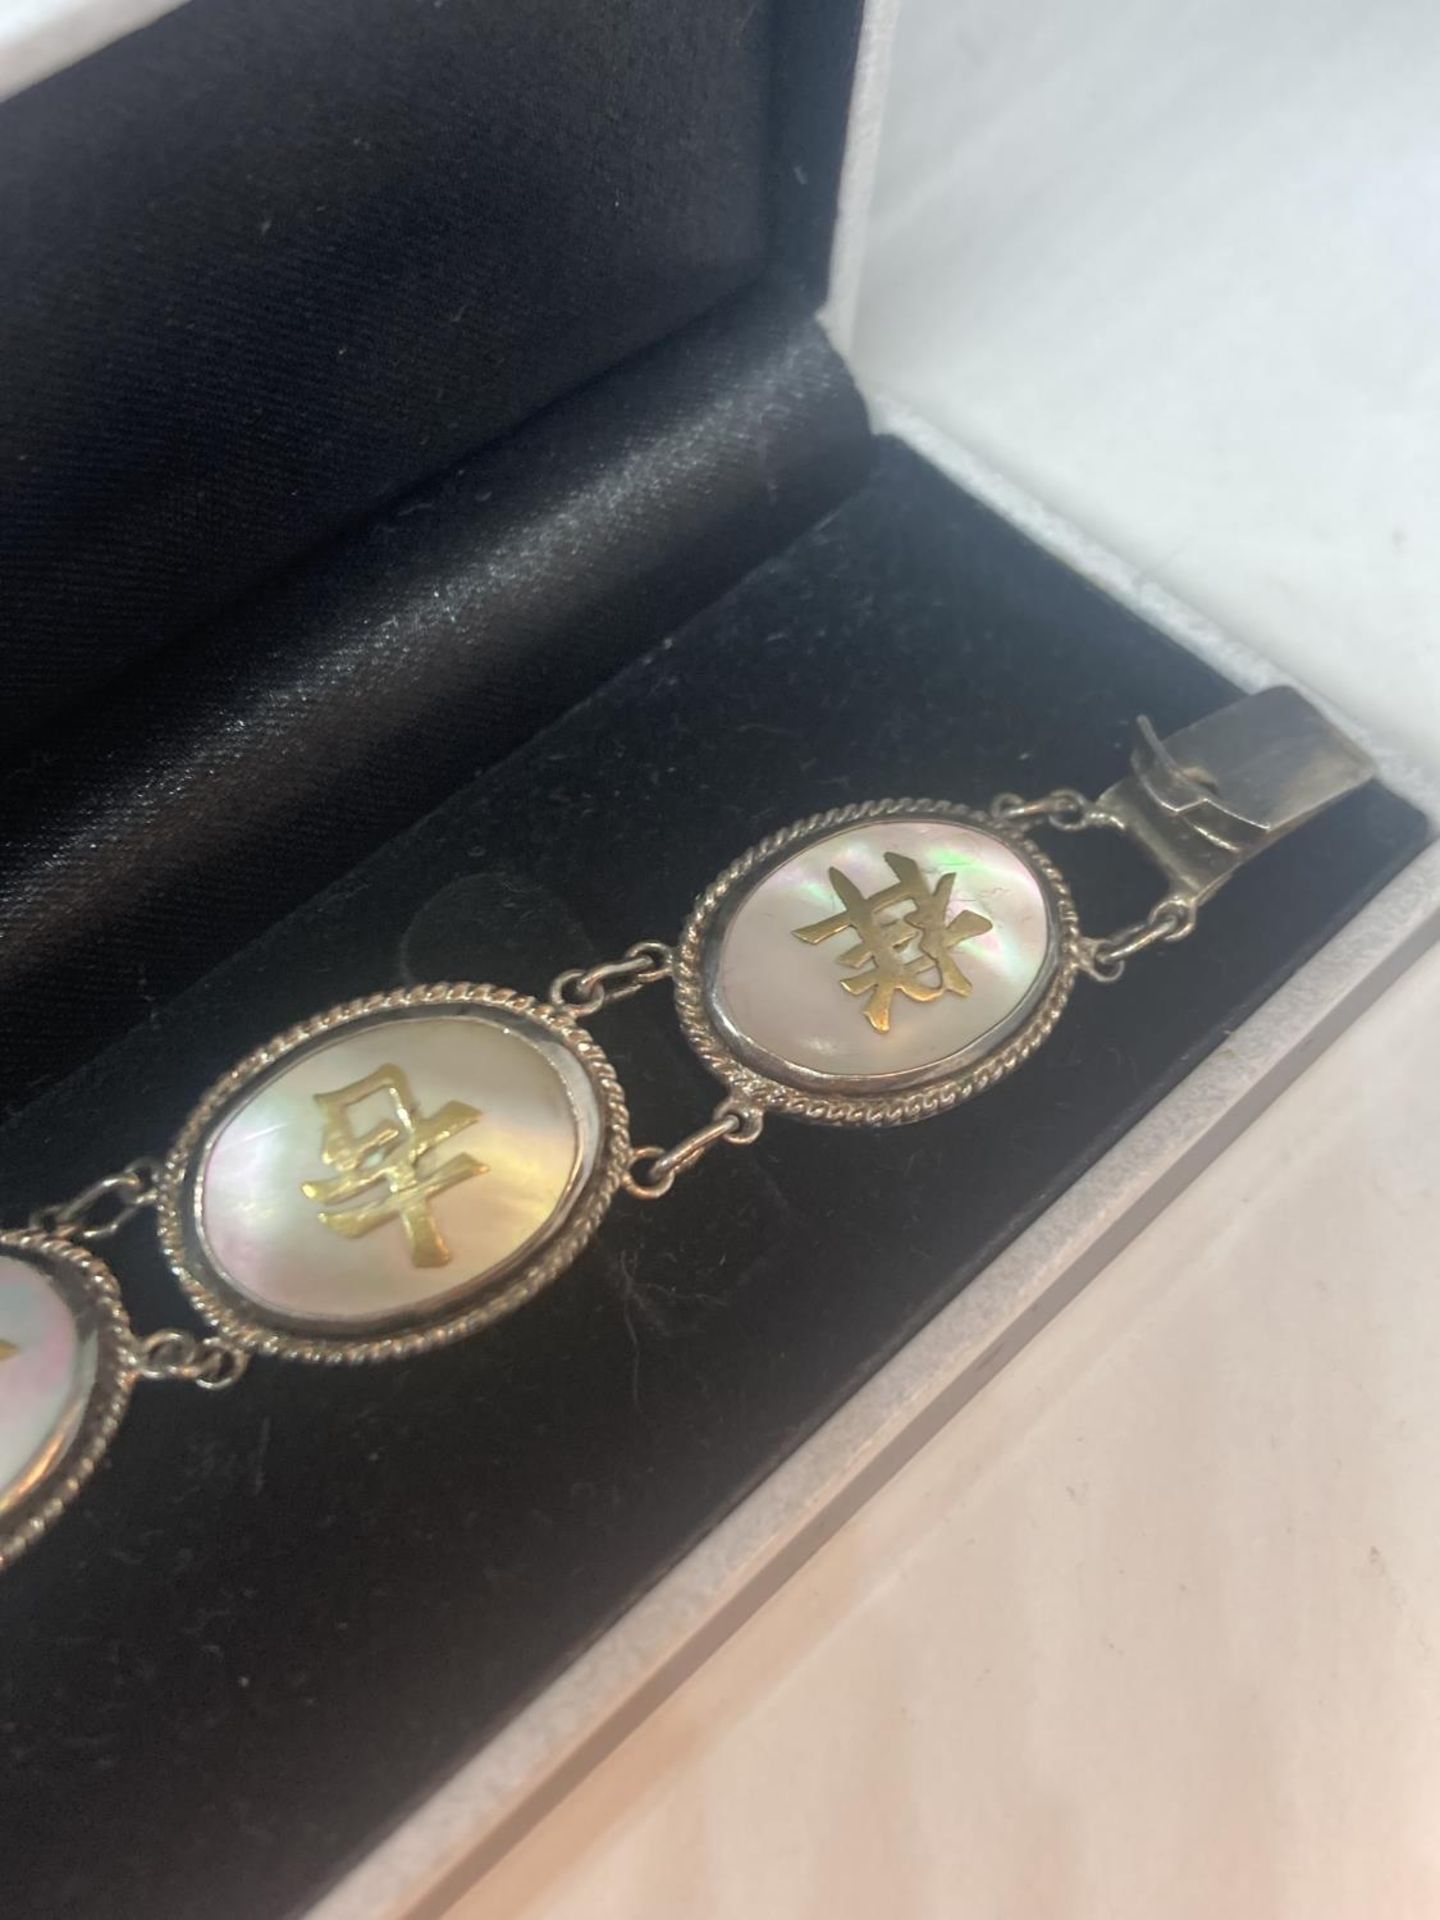 AN ORIENTAL SILVER AND MOTHER OF PEARL CHARACTER LINK BRACELET IN A PRESENTATION BOX - Image 7 of 10